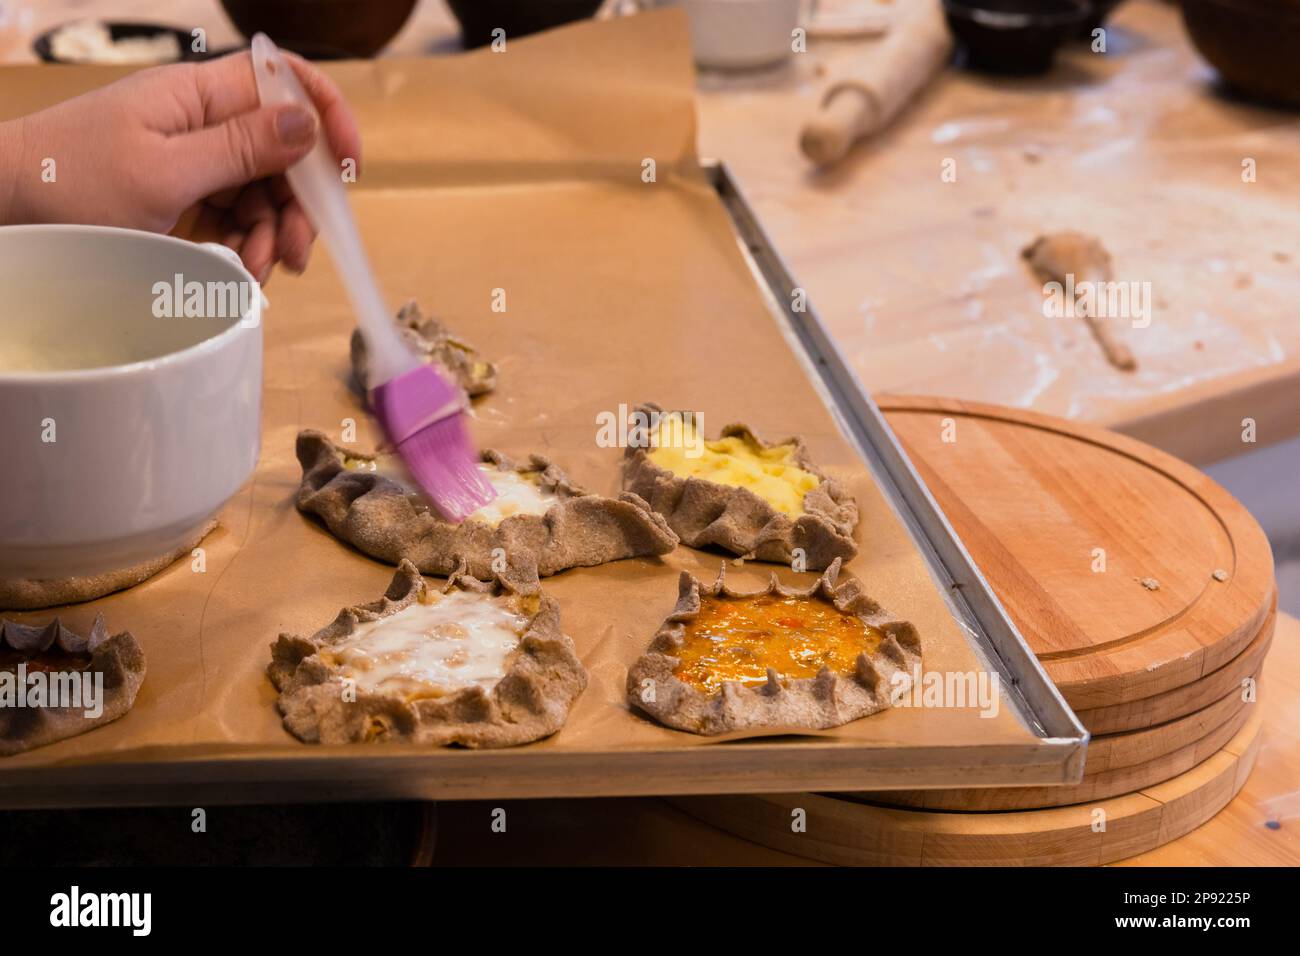 Preparing homemade Karelian pasties for bake, brushing with melted butter, close up photo with selective soft focus Stock Photo